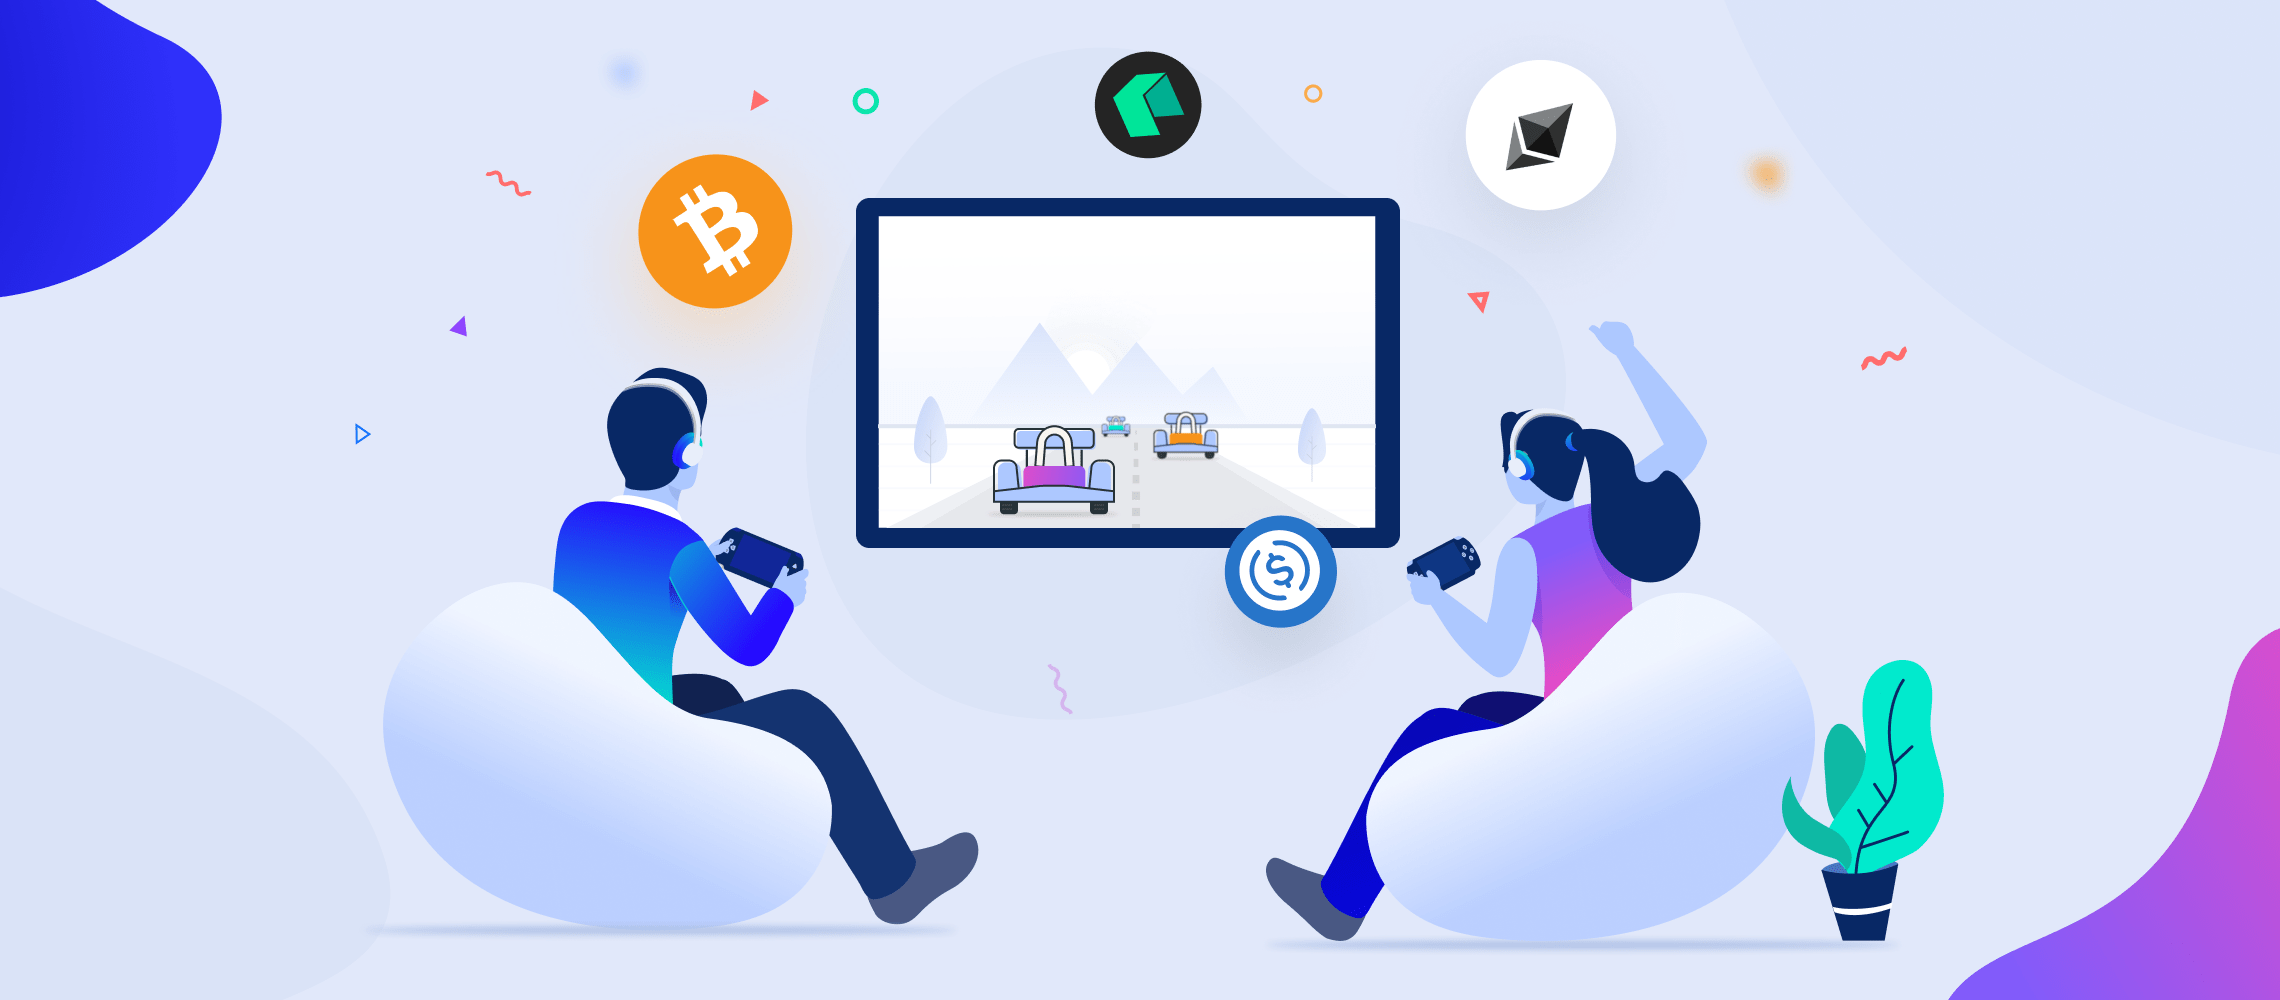 Blockchain Technology, Video Games and Play To Earn Opportunities